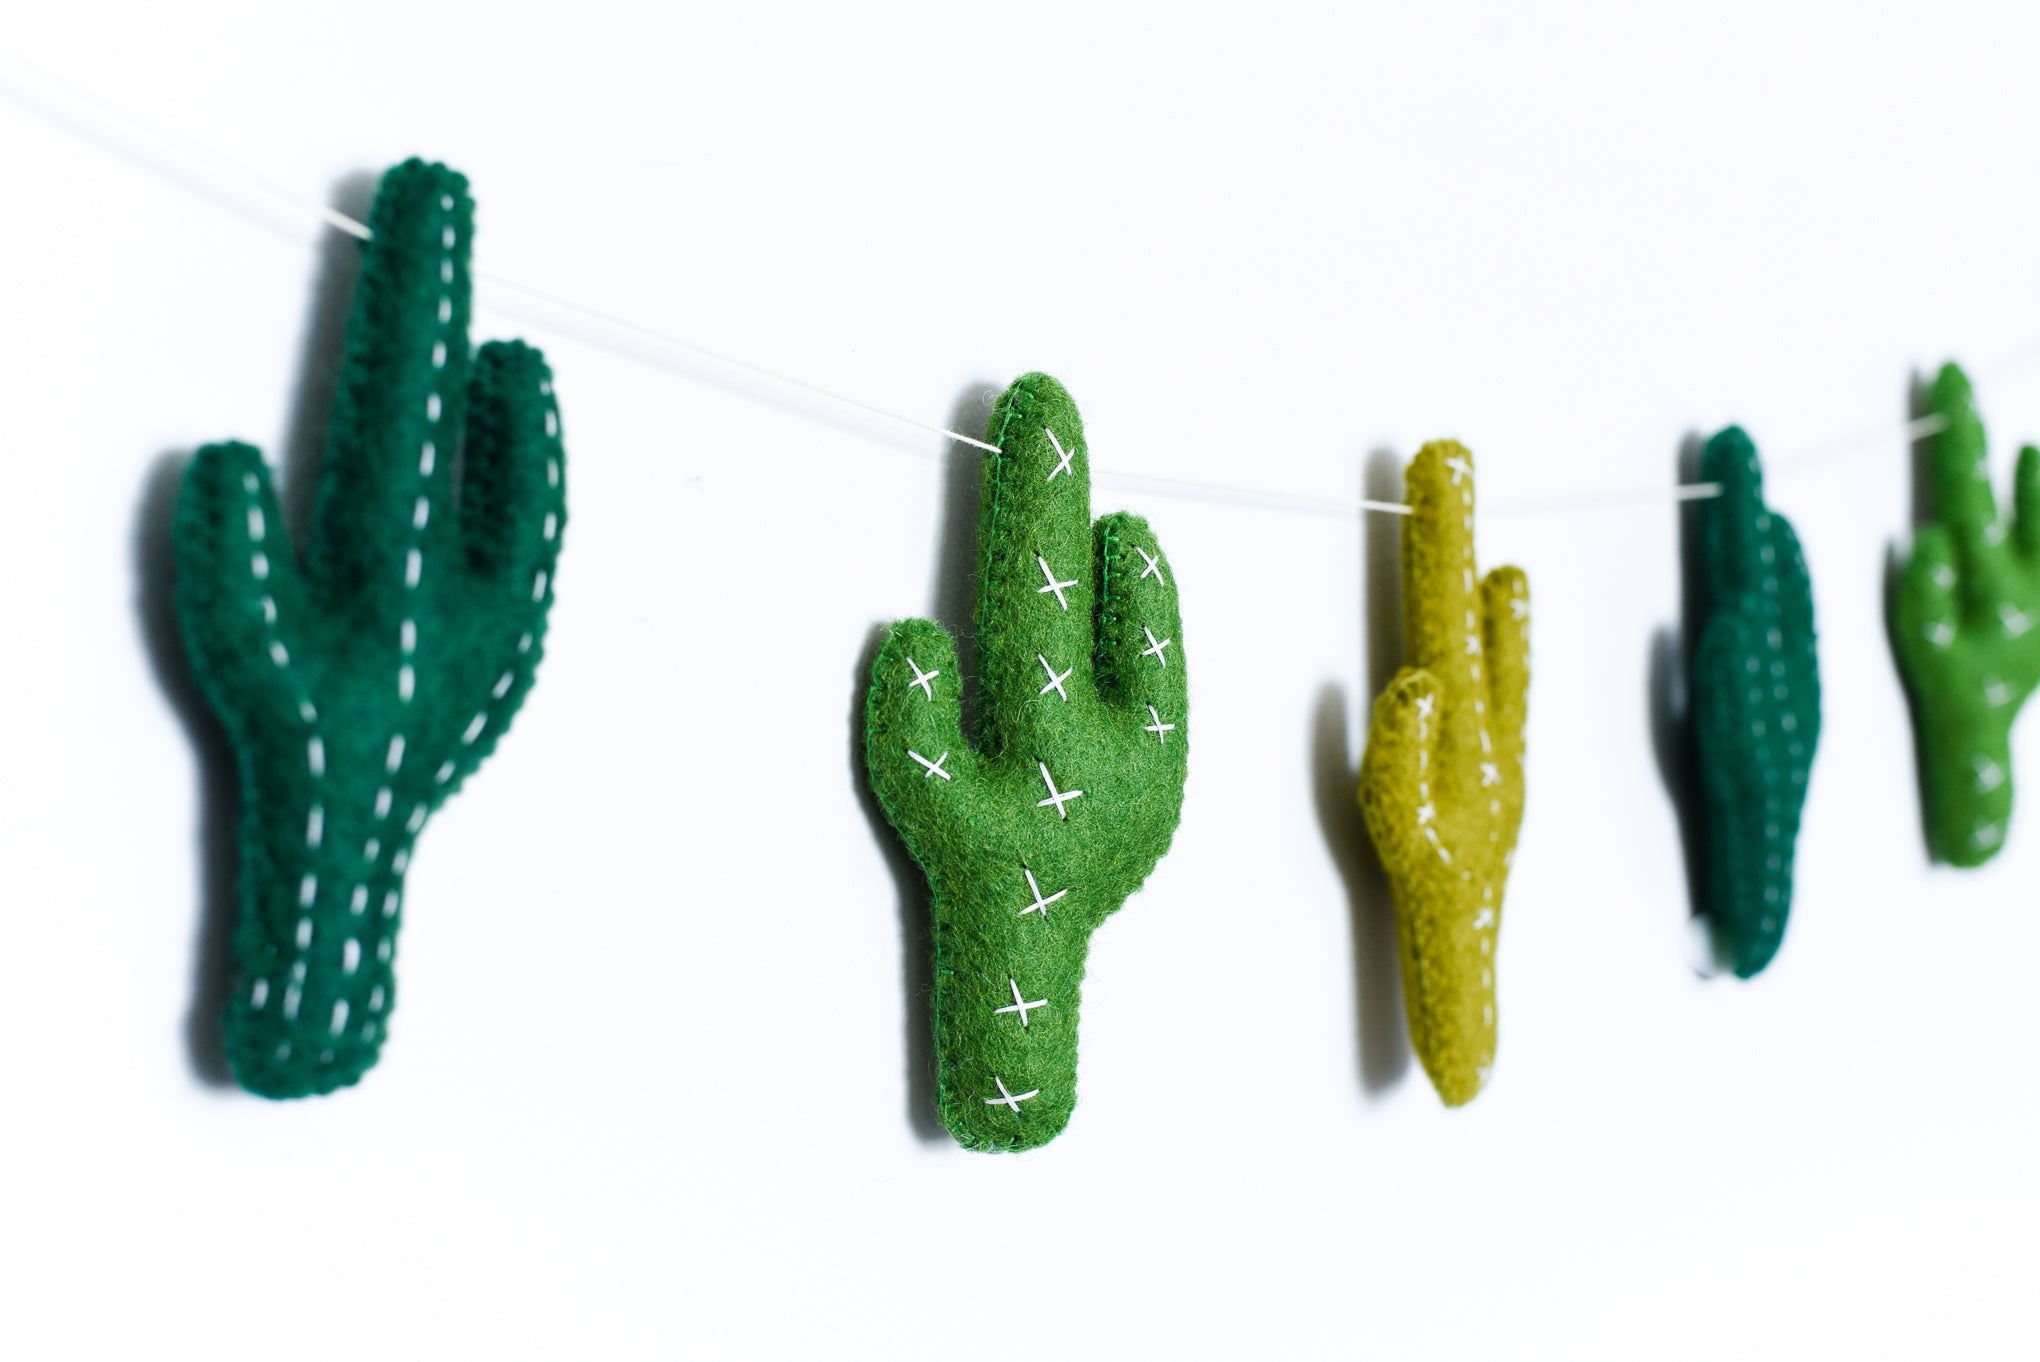 Cactus with embroidery details on white background 